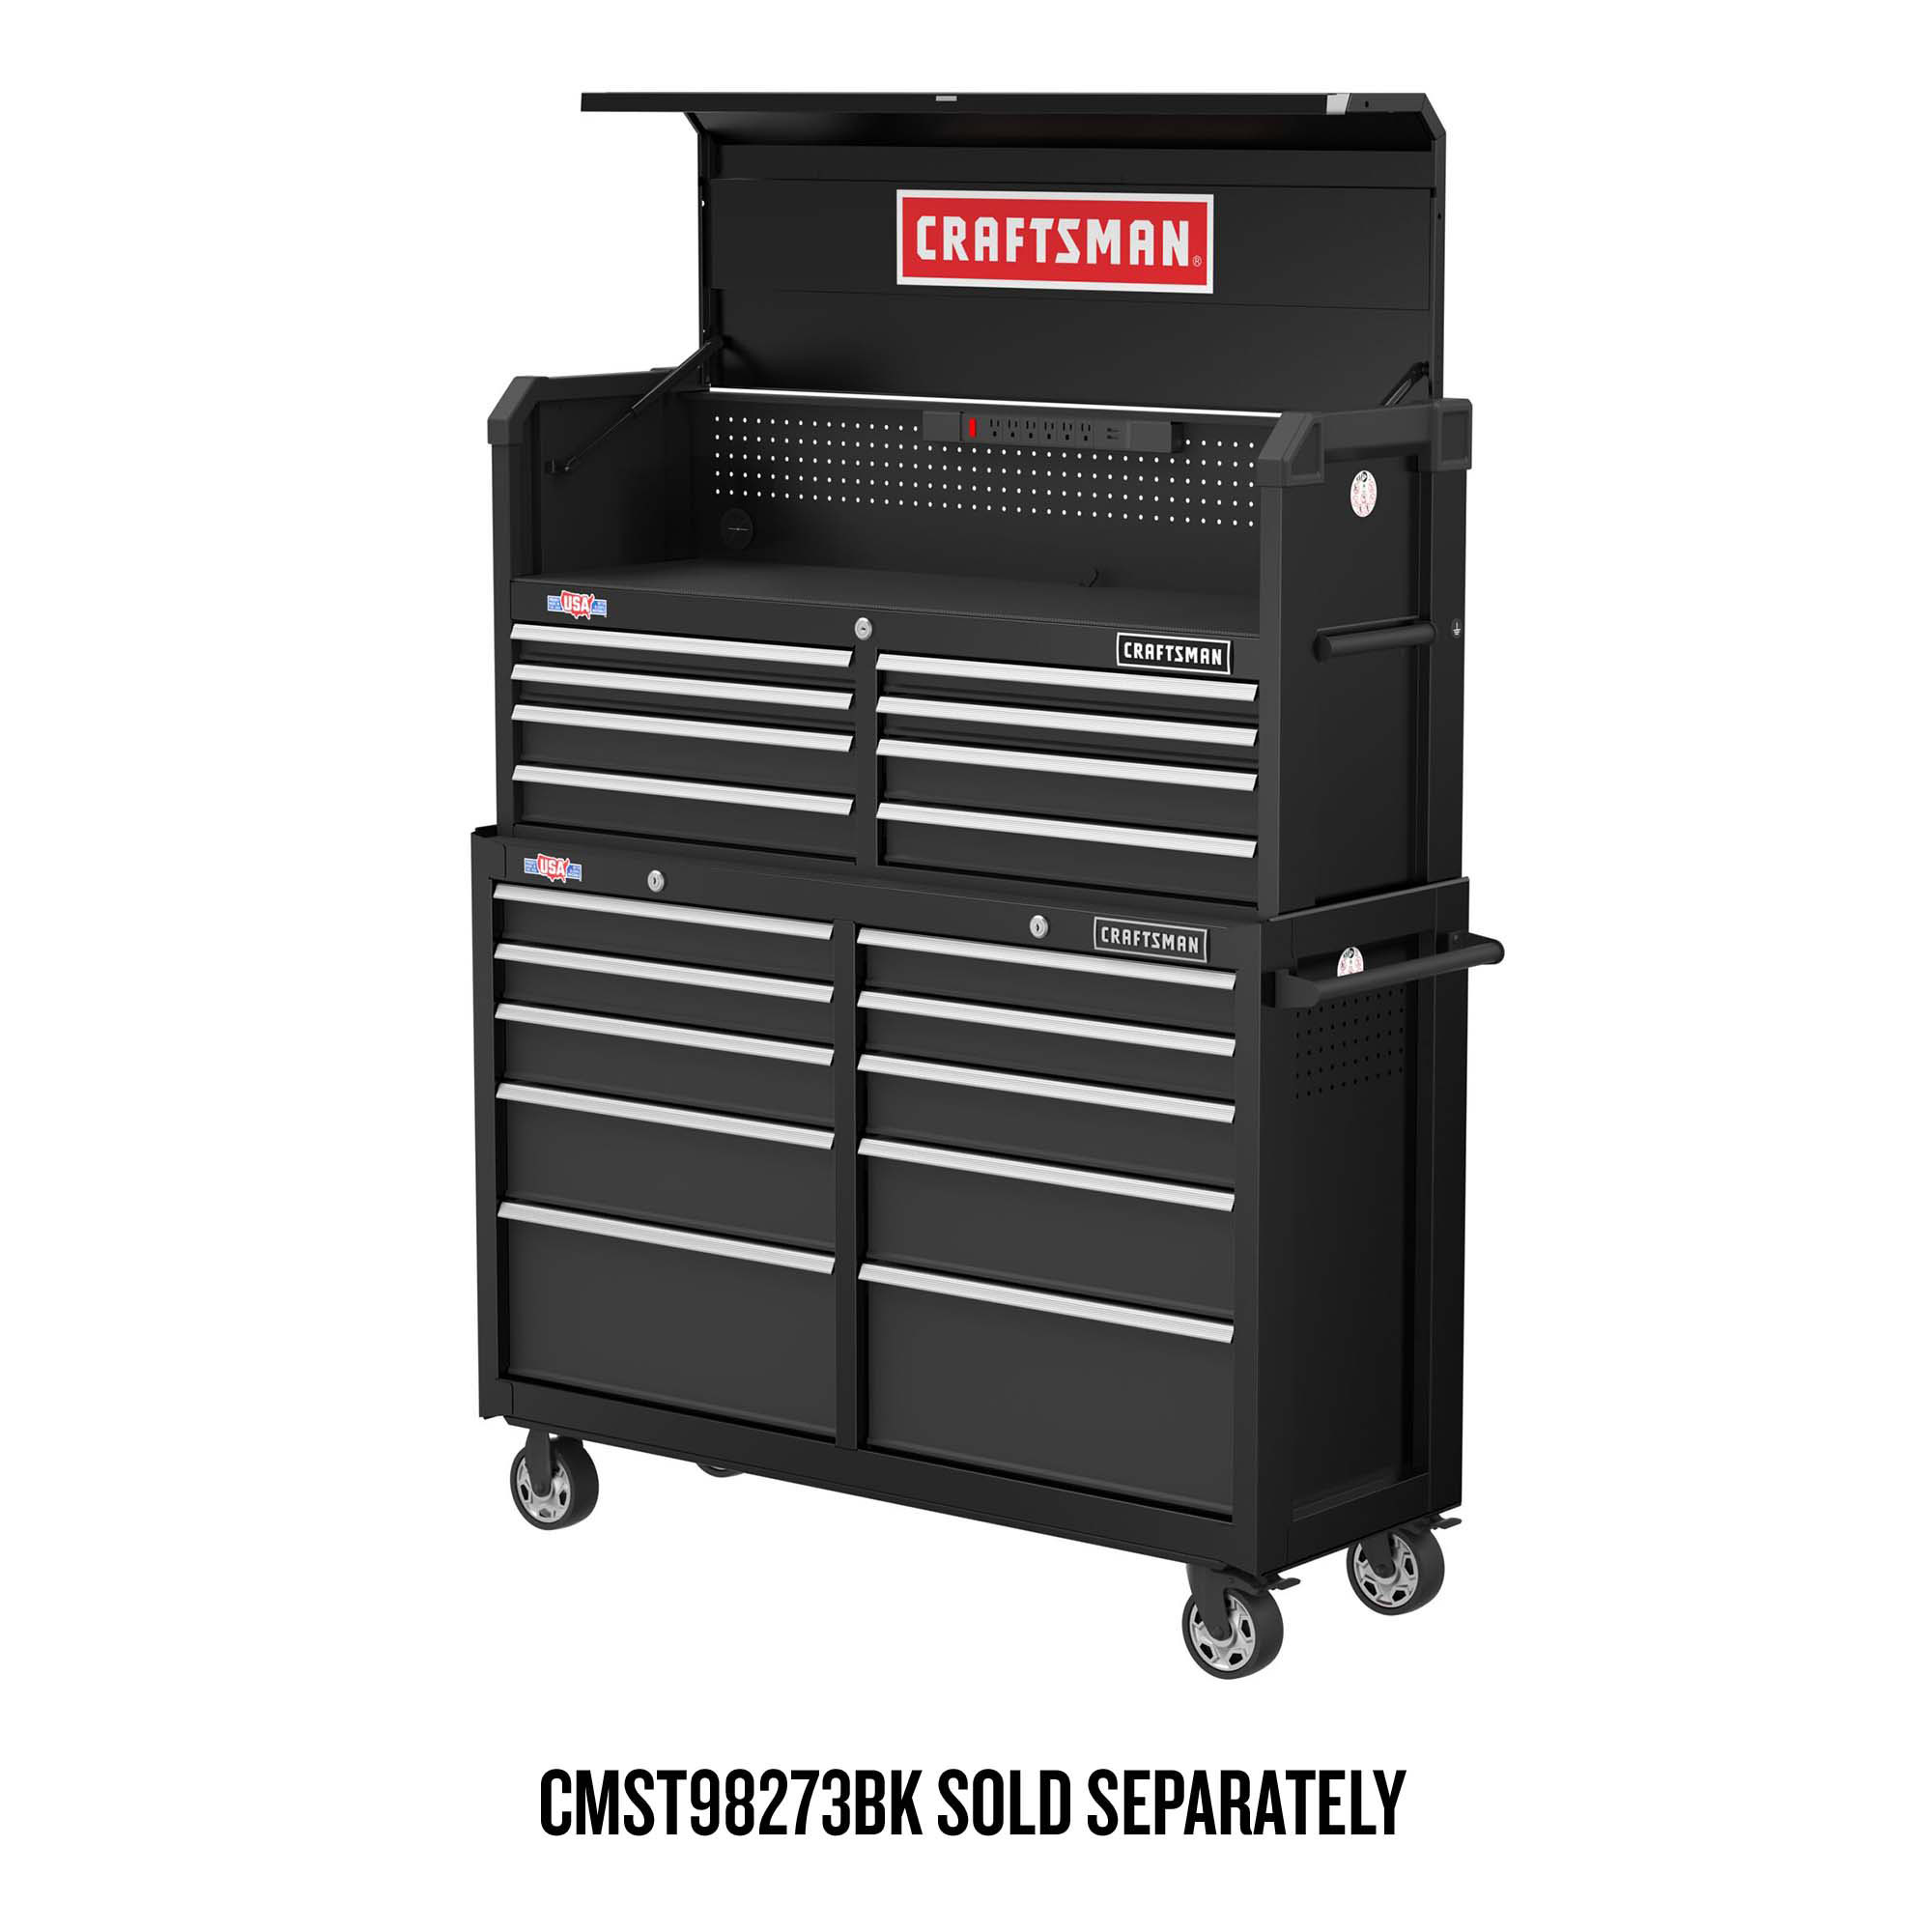 show original title Details about   BGS Workshop Trolley 8 Drawer 296 Piece Tool Trolley Tool Box 31920639 